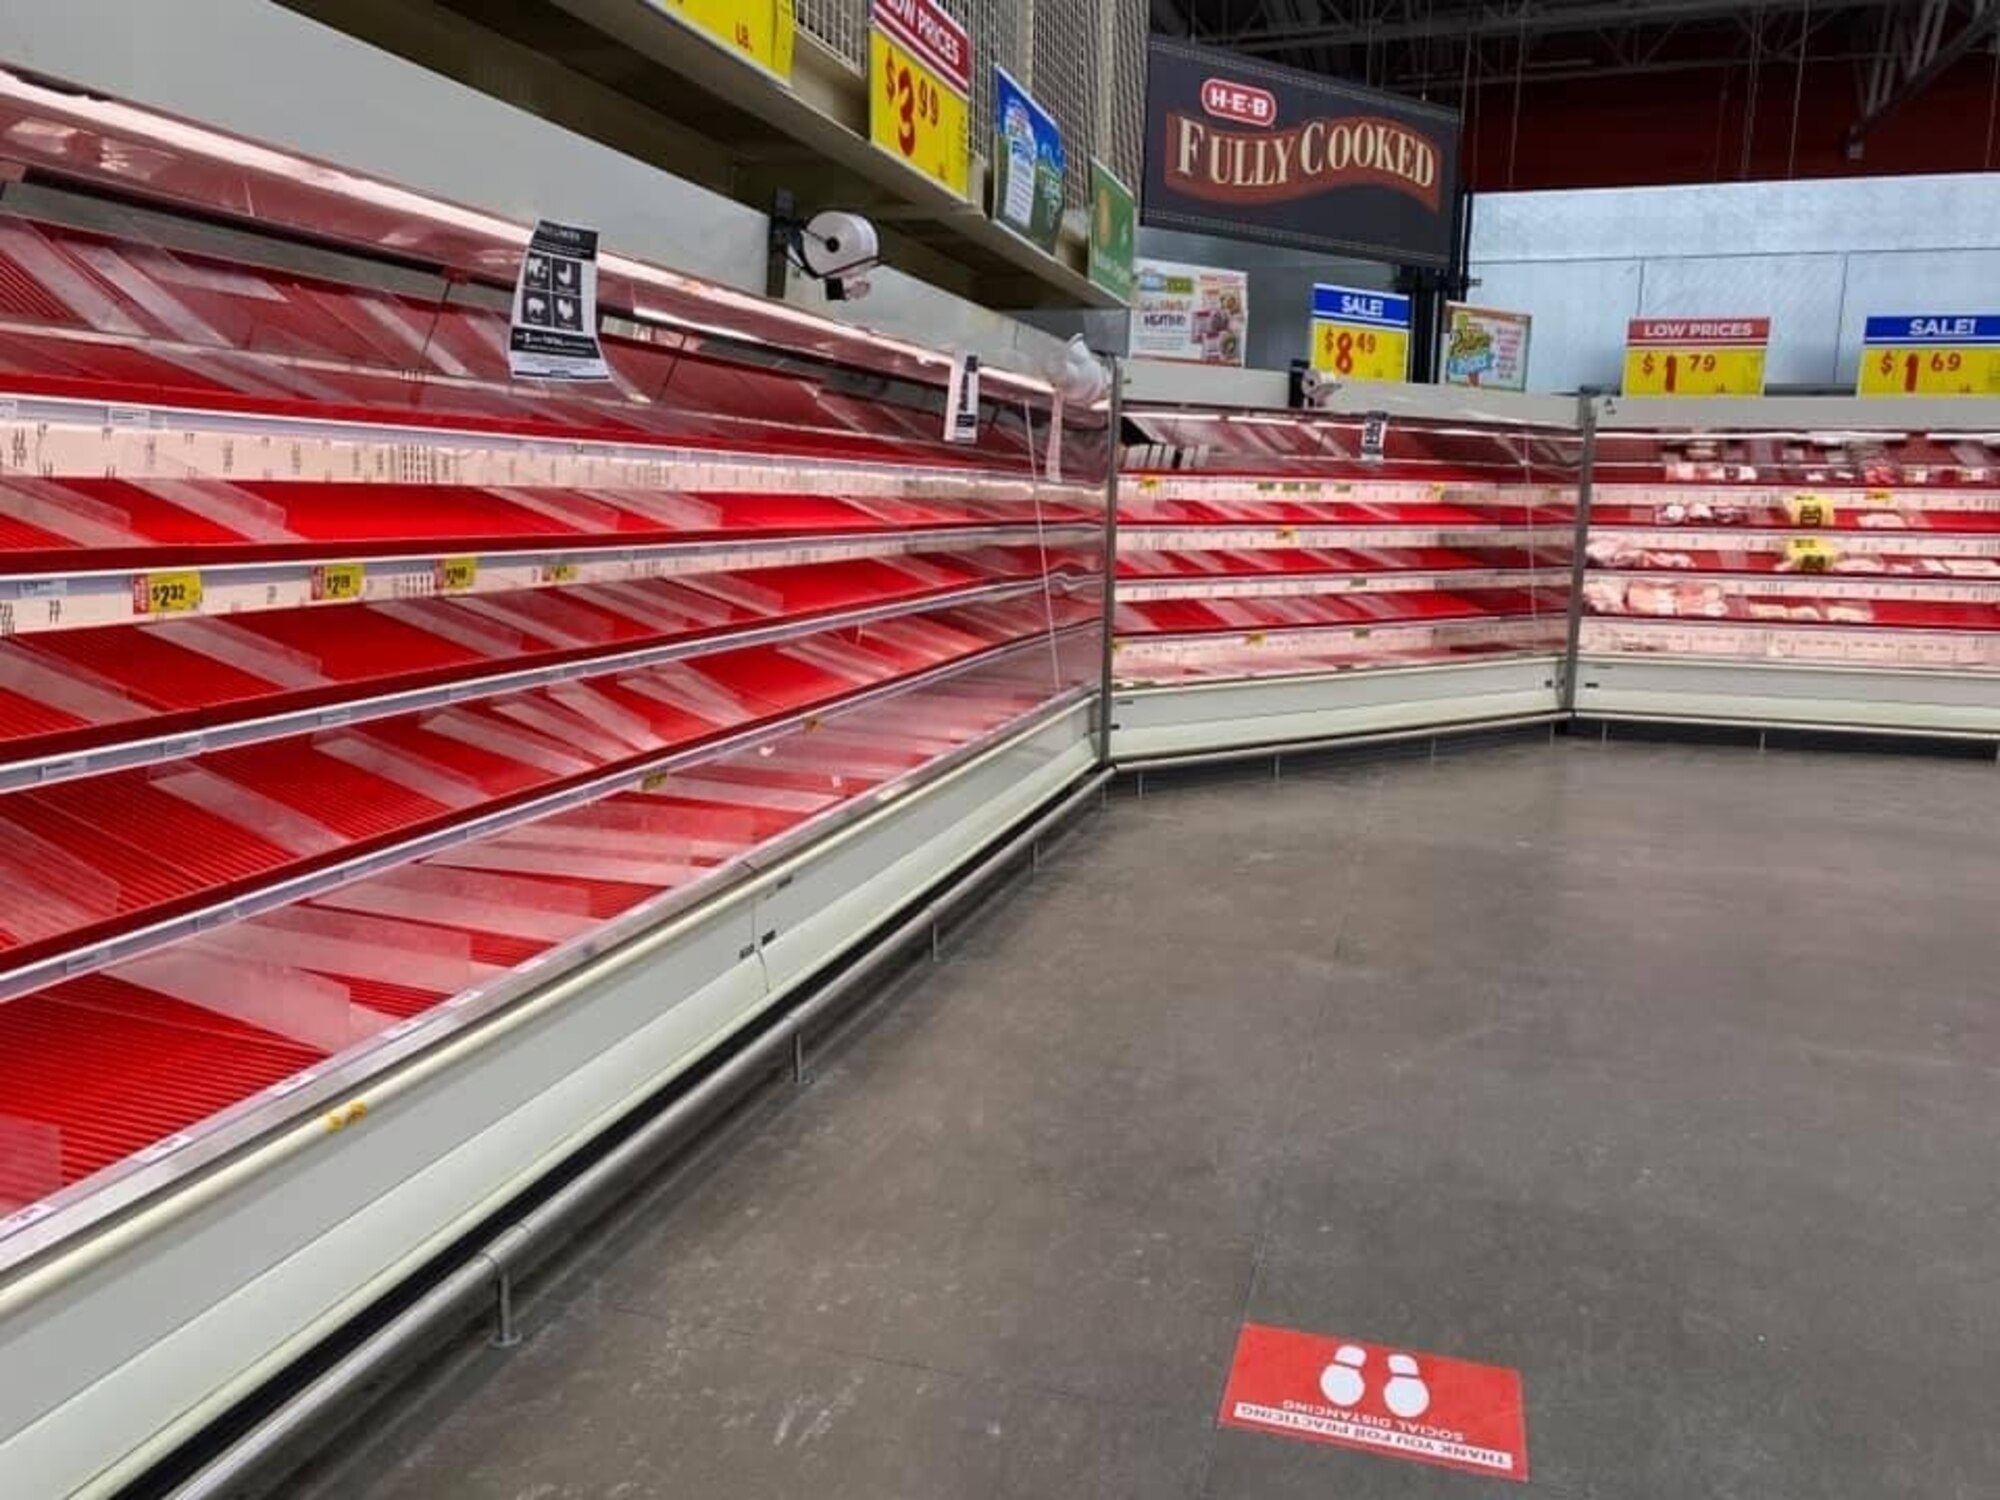 Meat shelves are barren in a local grocery store from the snowstorm, in San Angelo, Texas, Feb. 20, 2021. The storm created a local emergency and many members of Goodfellow Air Force Base were affected in some way from the lack of water, food, electricity and heat. (Courtesy photo)